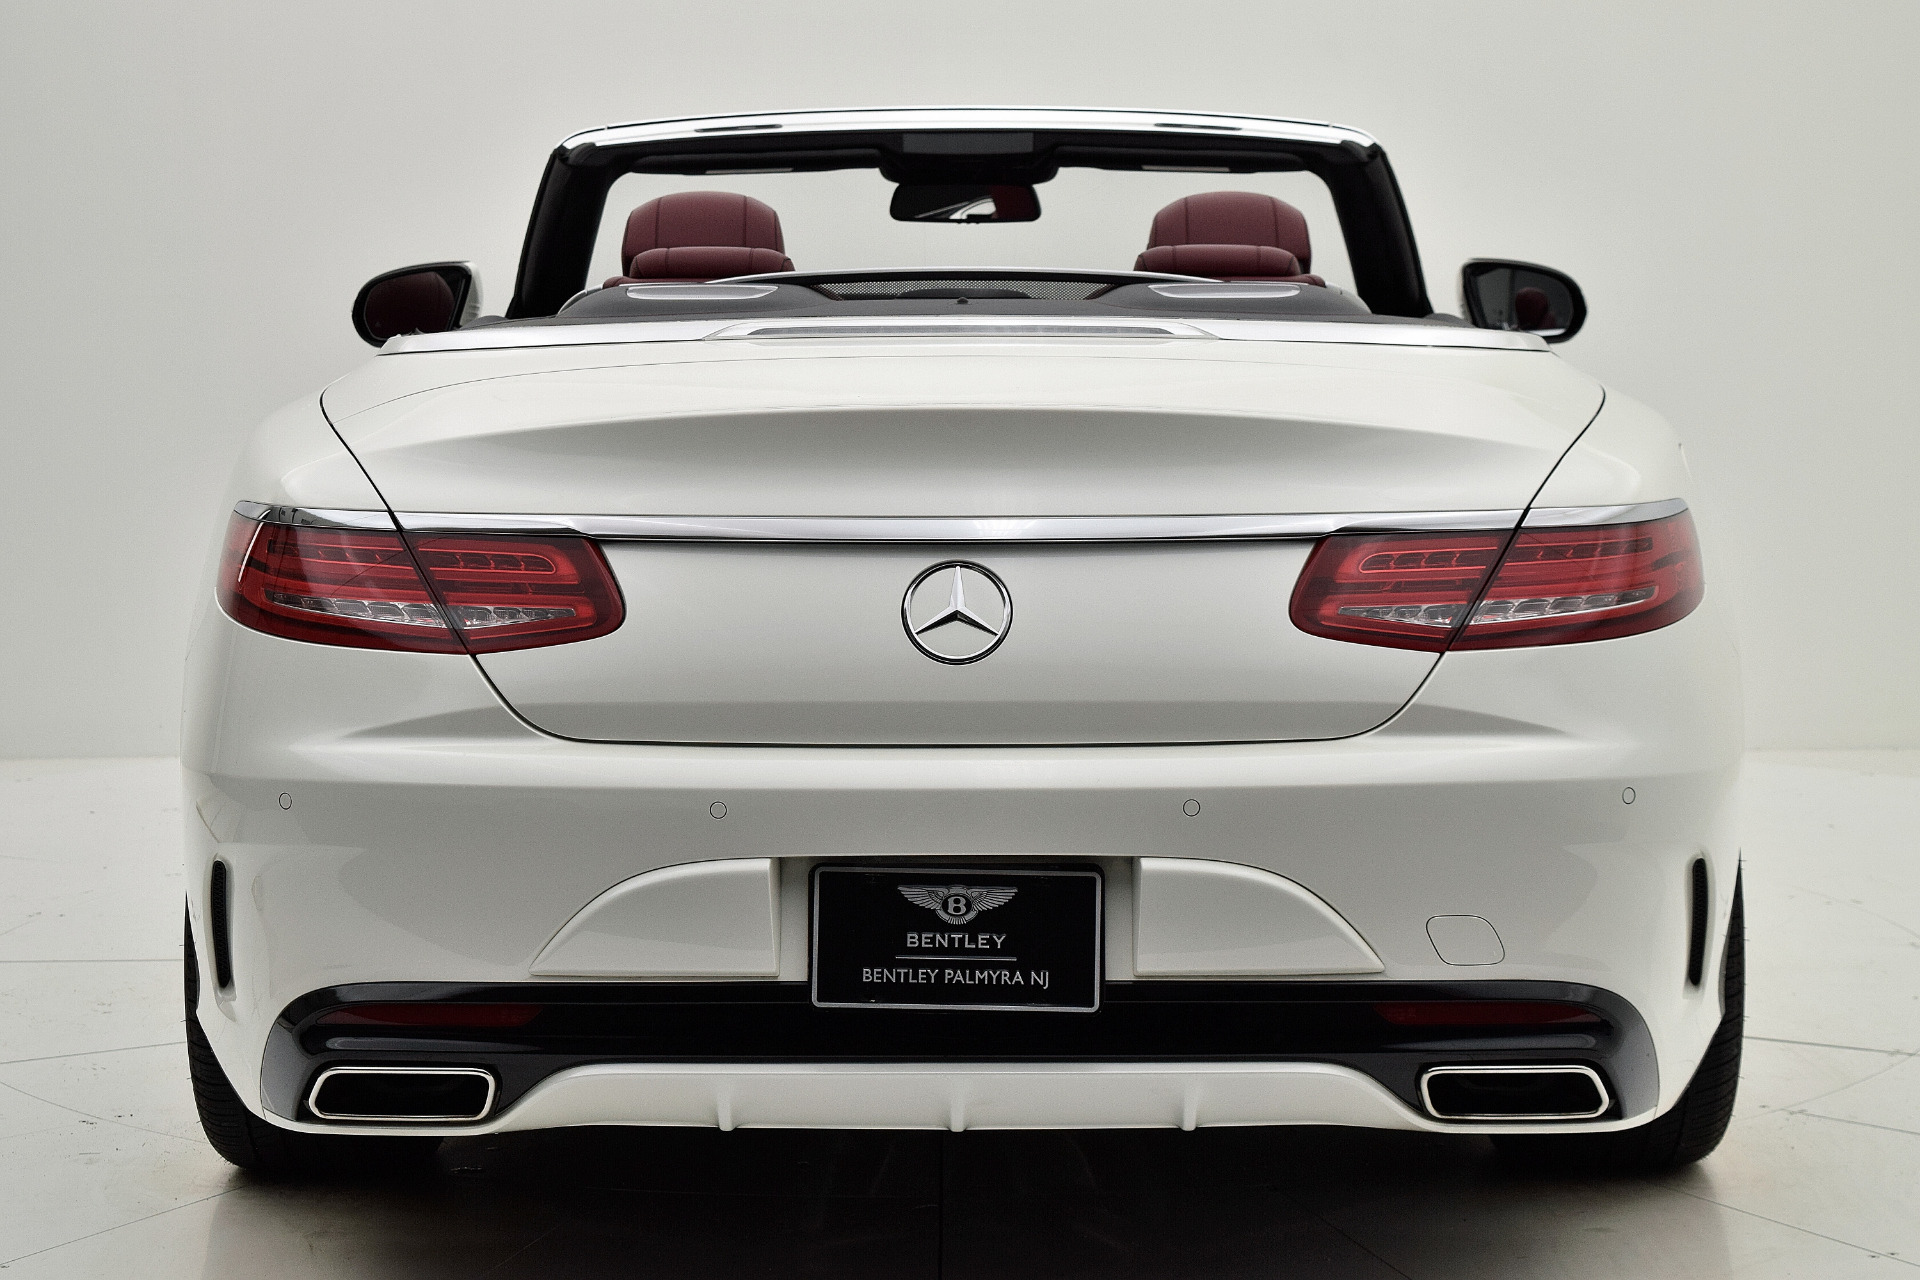 Used 2017 Mercedes-Benz S-Class S 550 Cabriolet For Sale (Sold)